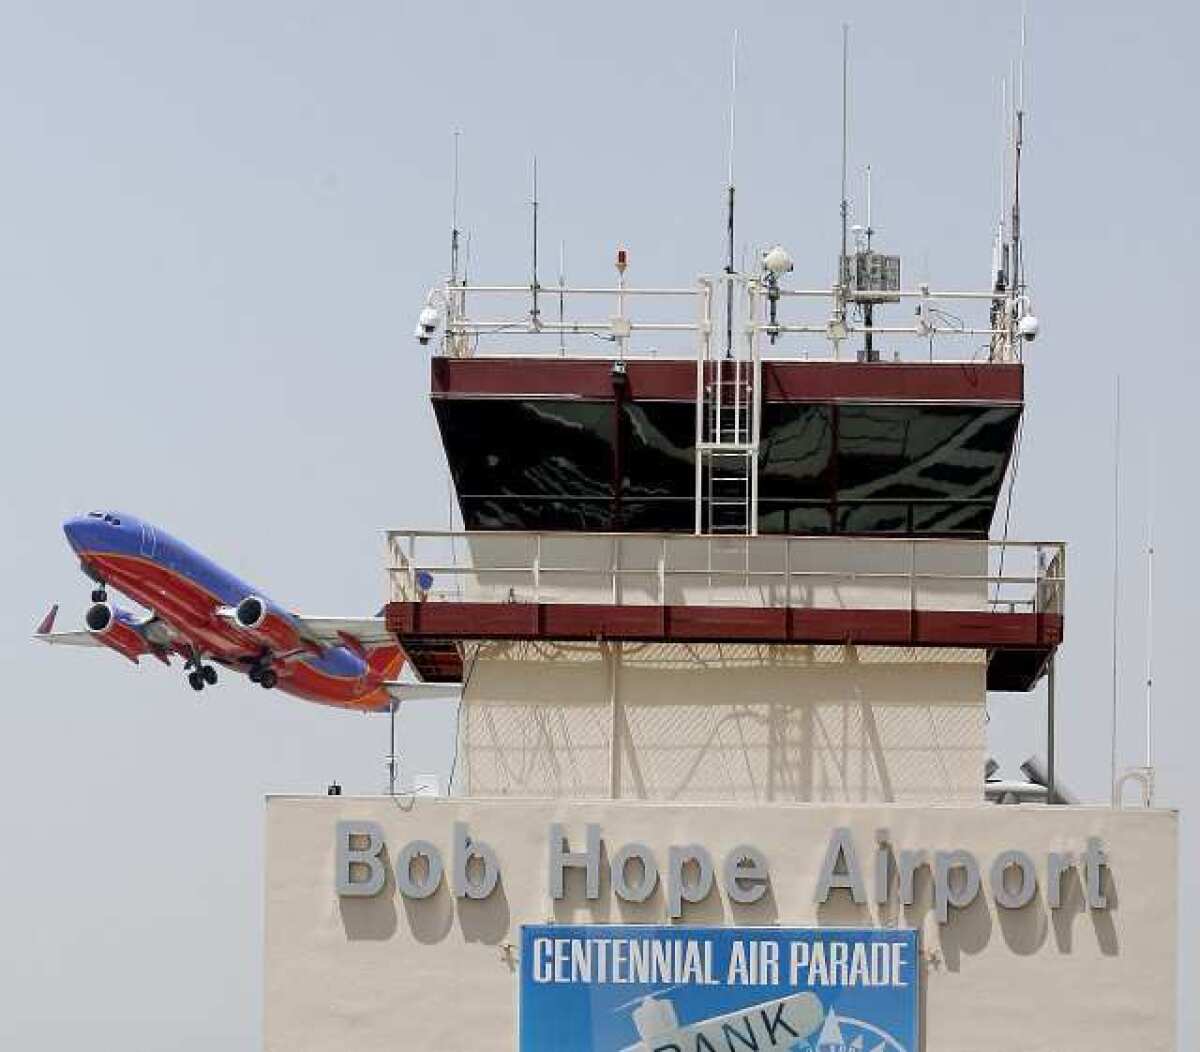 A Southwest Airlines airplane takes off at the Bob Hope Airport in Burbank. The airline scored well in on-time departures.